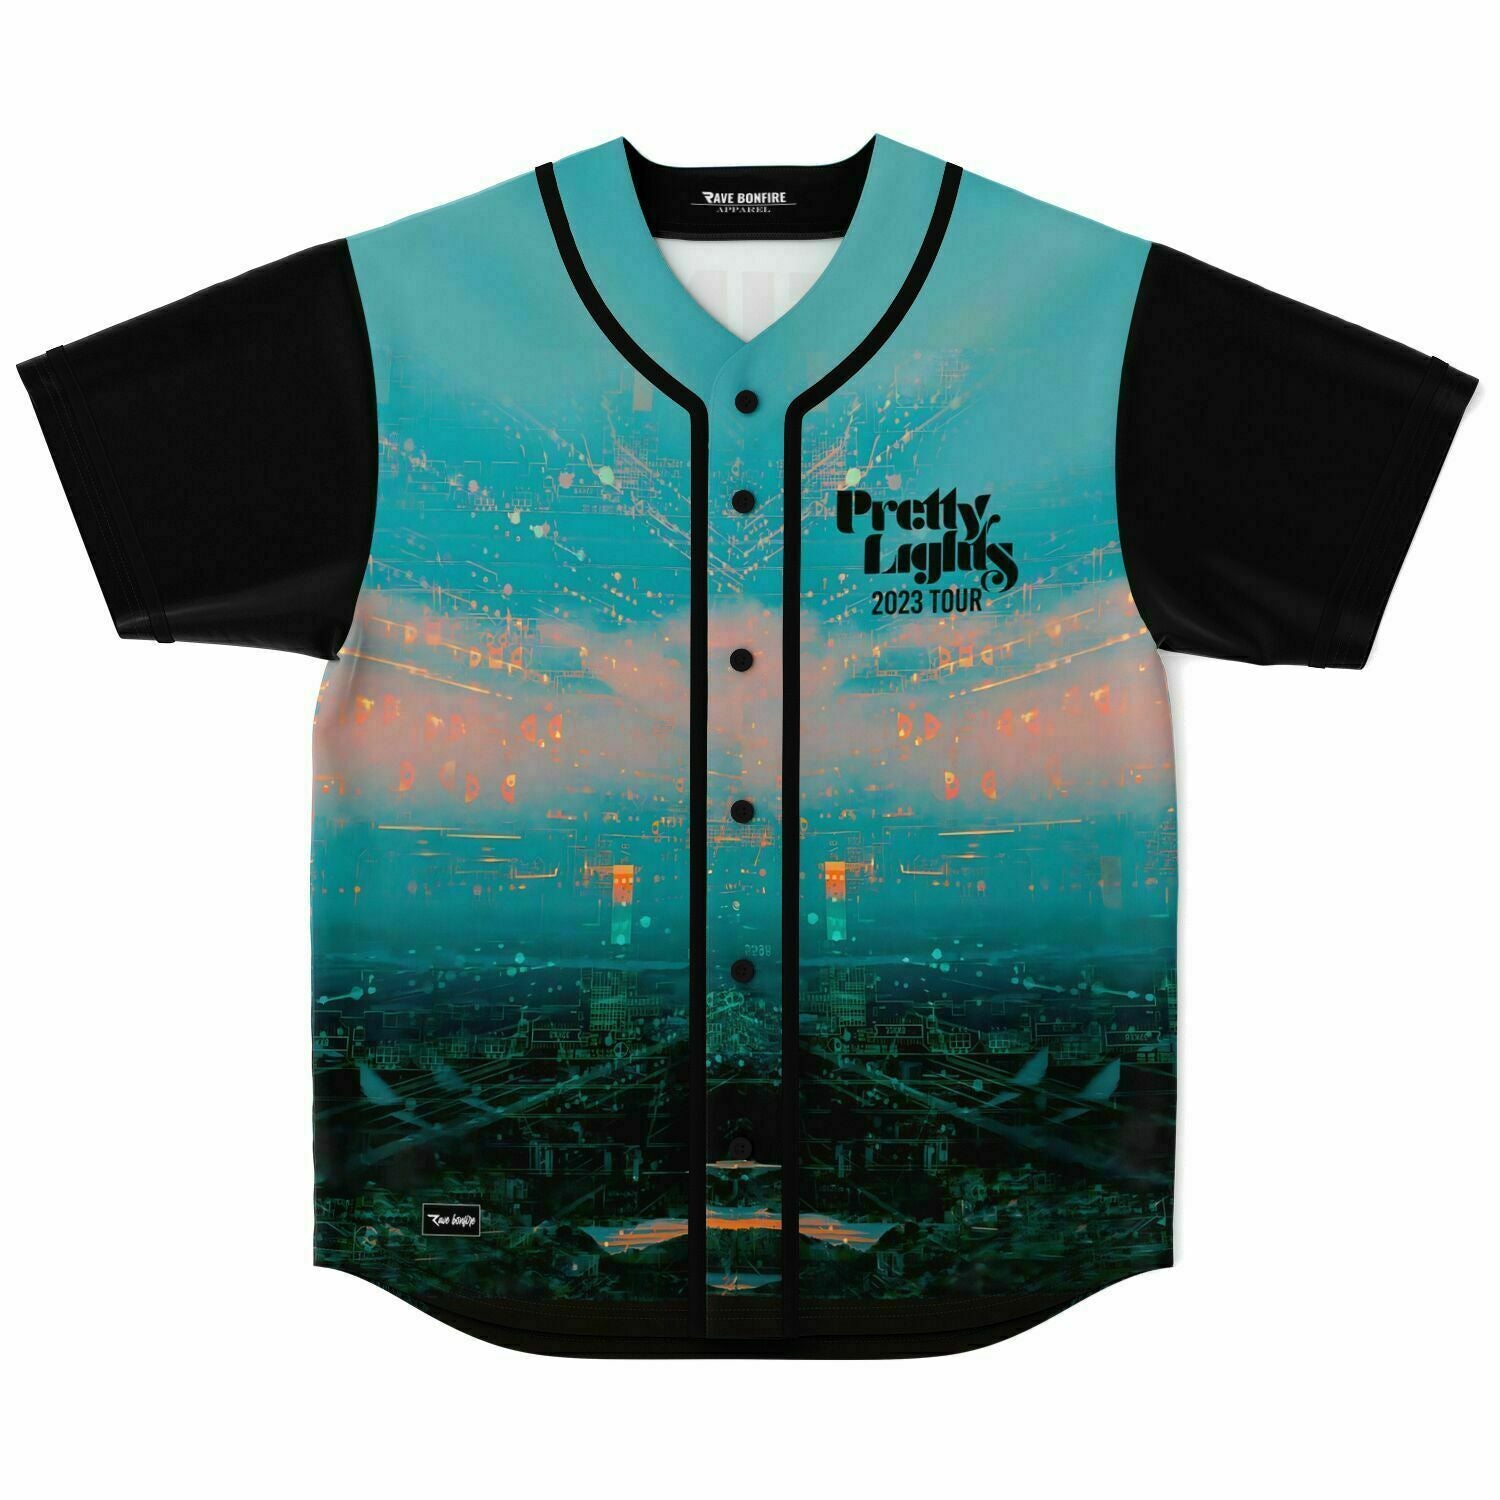 The Ellis Baseball Jersey V2 with an image of a city skyline.